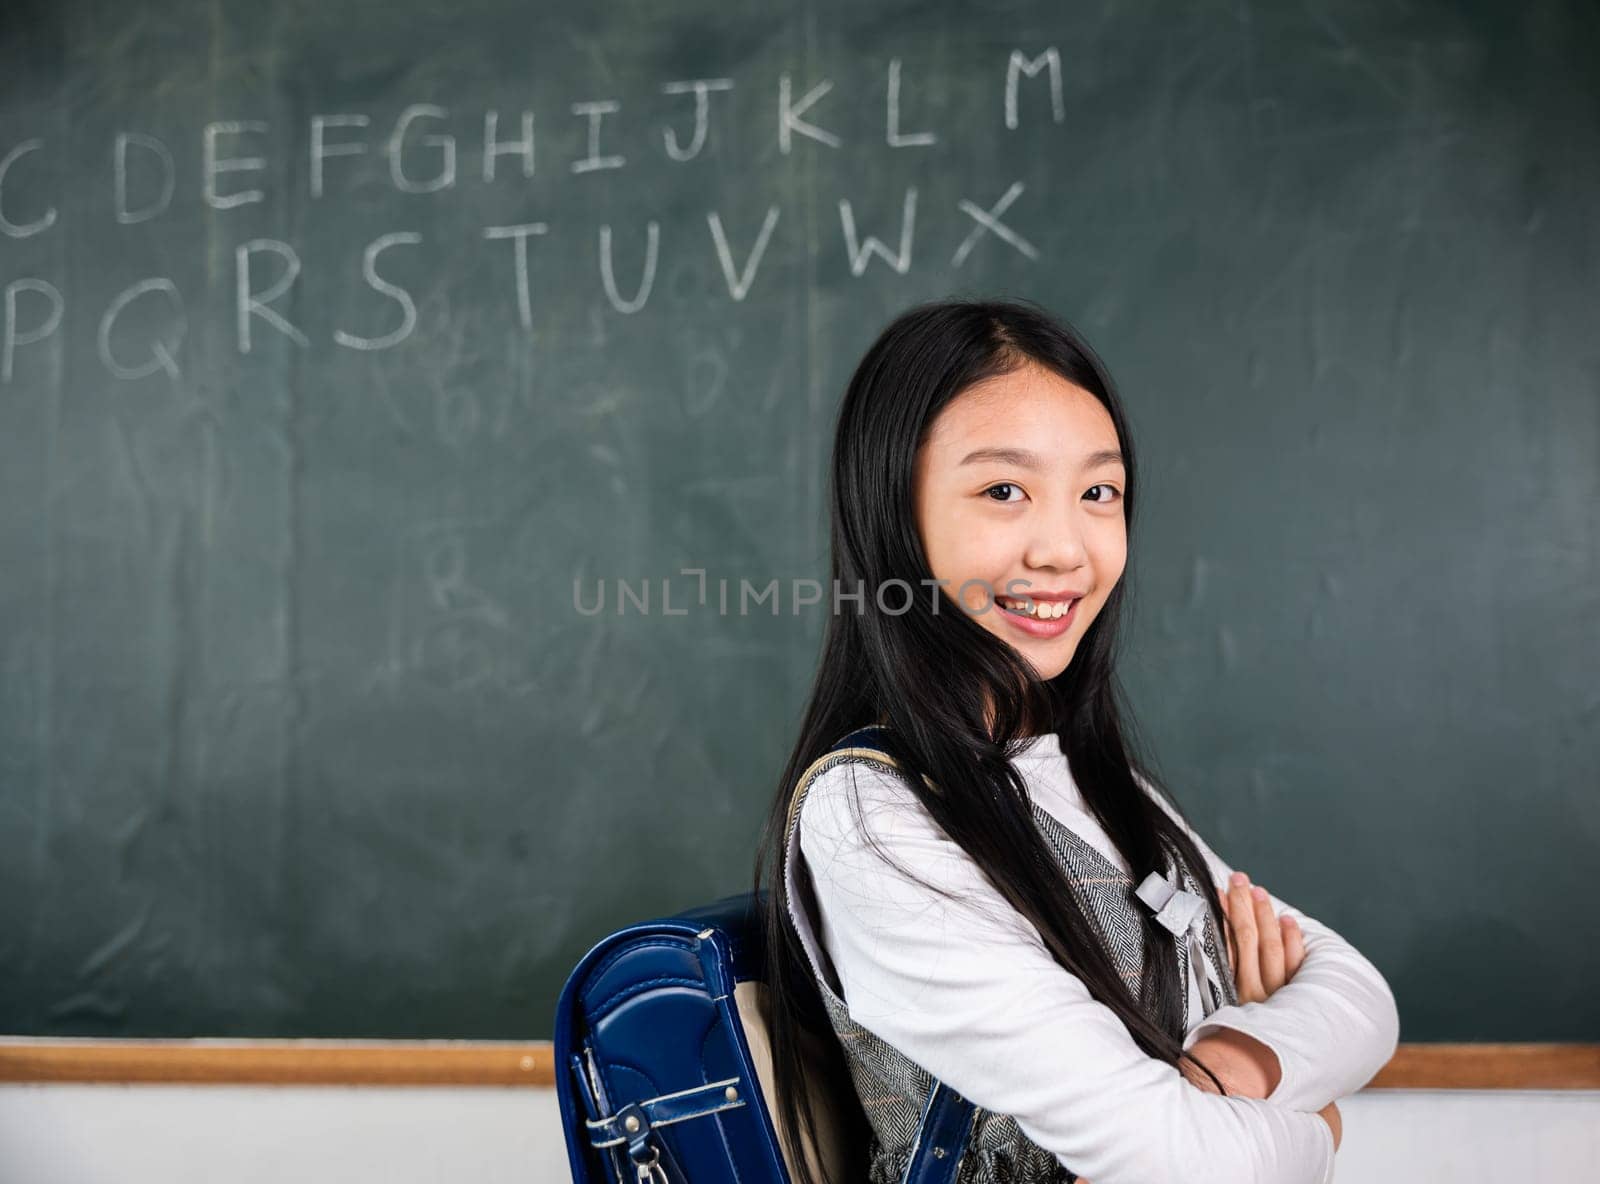 A young girl is smiling and posing in front of a chalkboard with the alphabet on it. Concept of learning and education, as the girl is likely a student in a classroom setting. Back to School